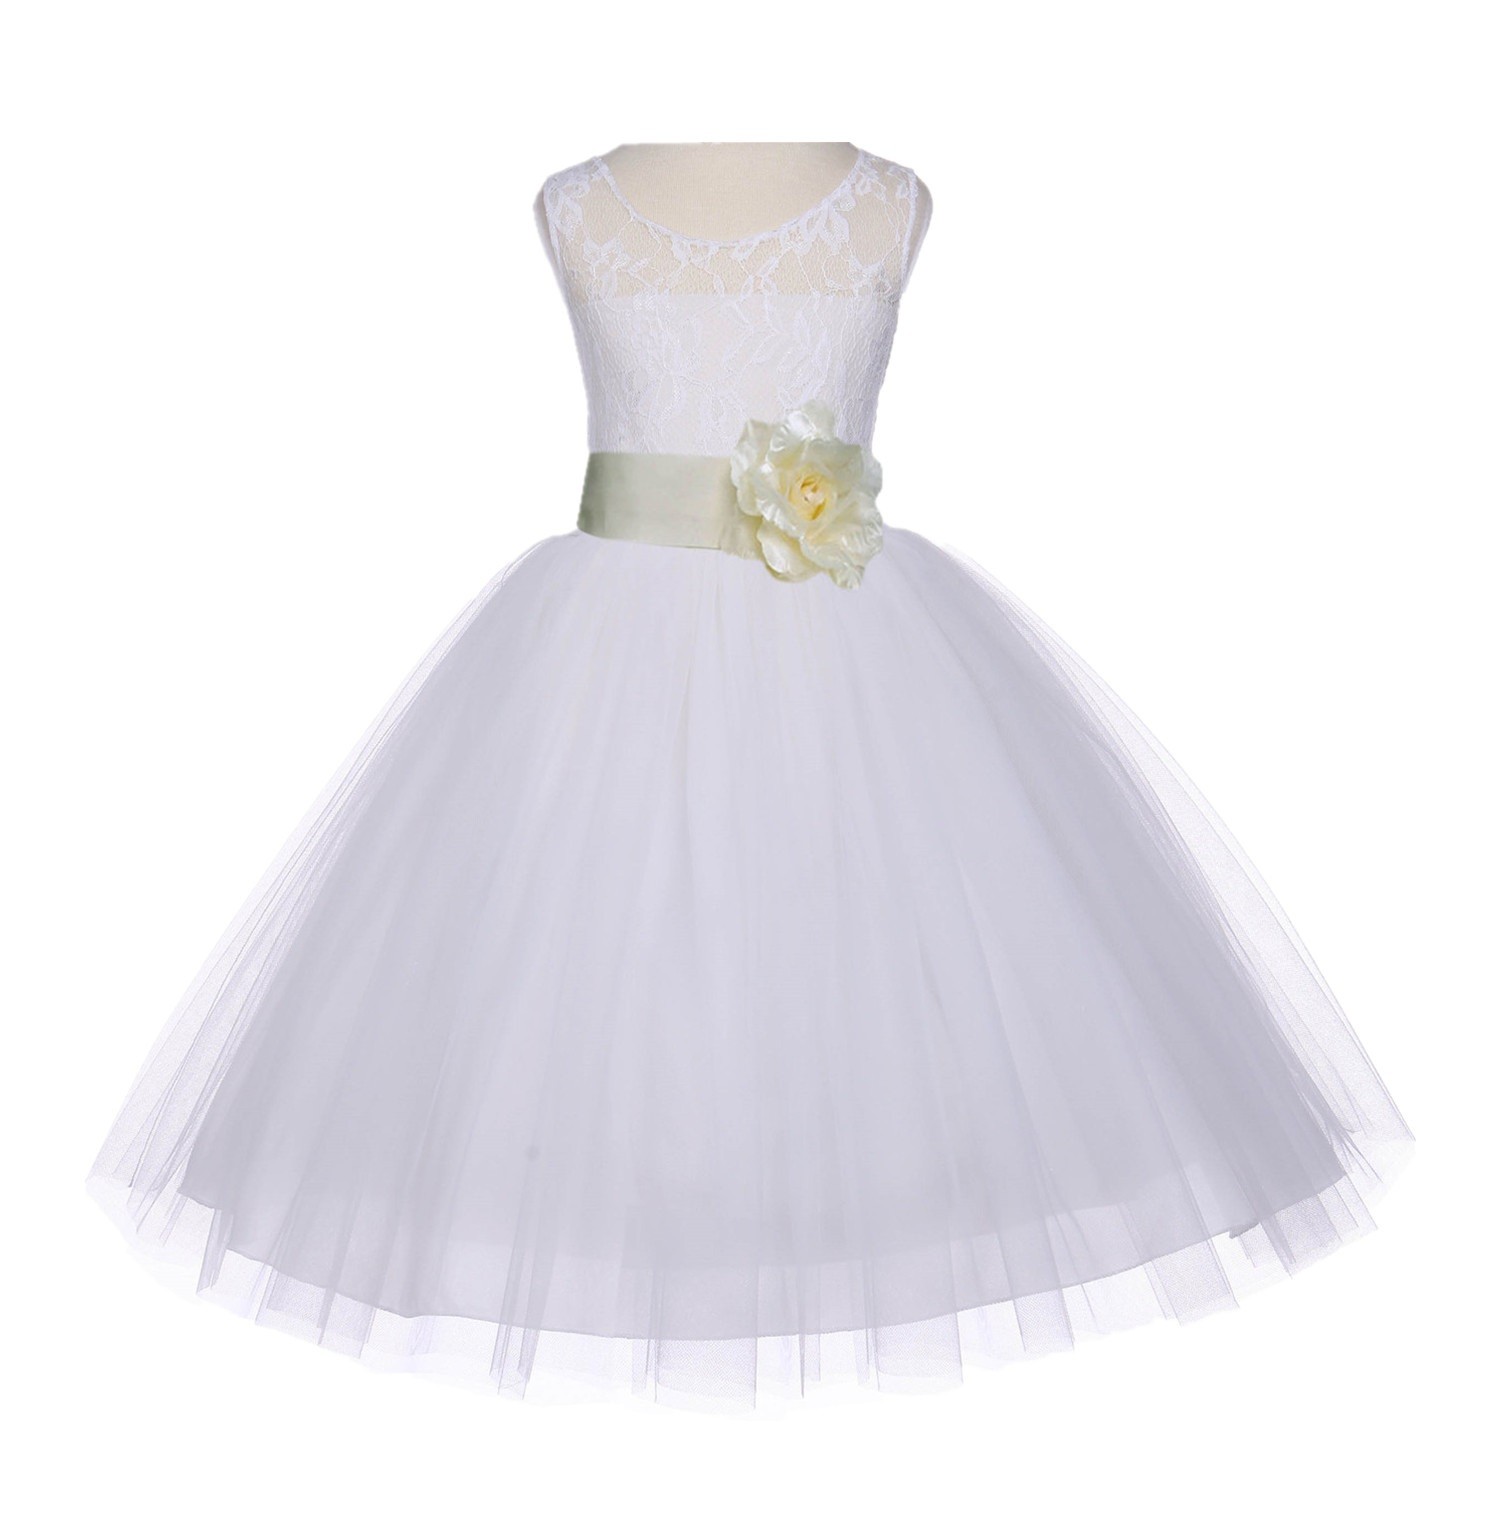 Ivory/Ivory Floral Lace Bodice Tulle Flower Girl Dress Bridesmaid 153S